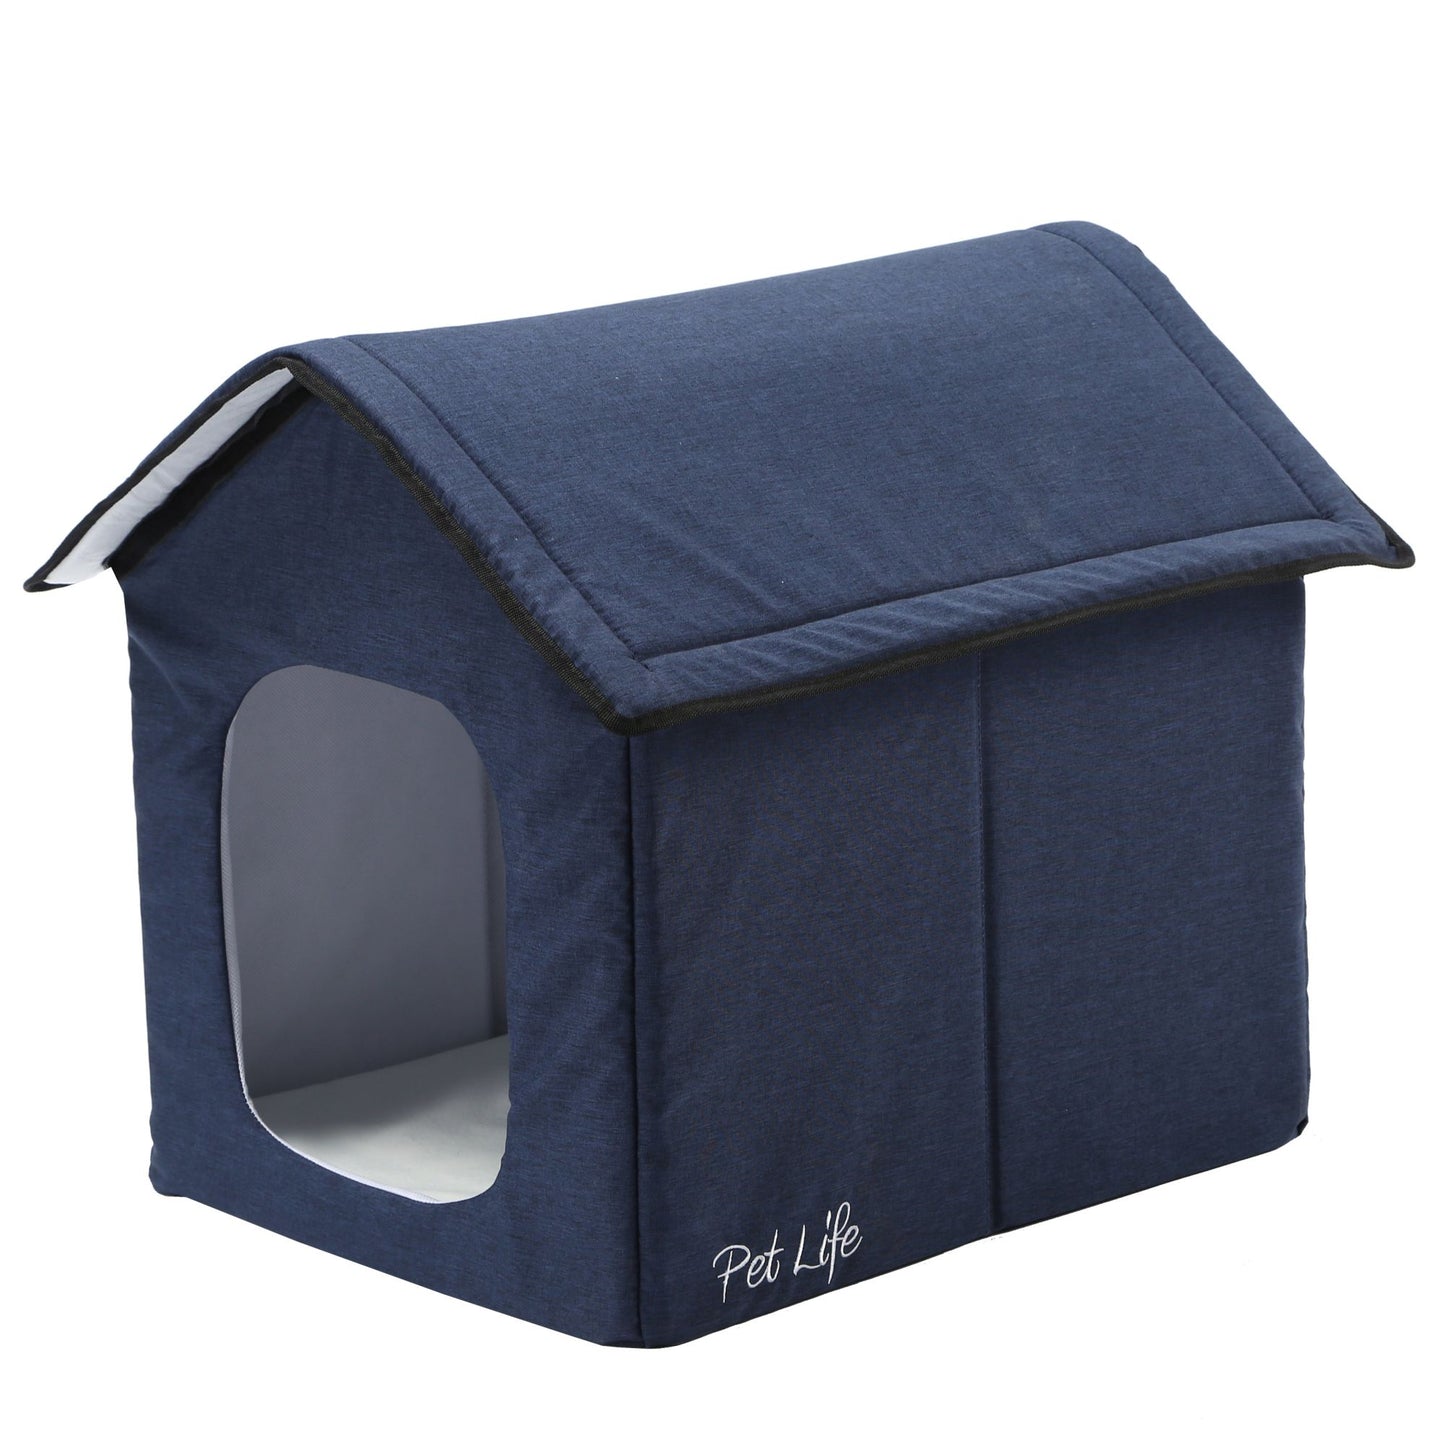 Electronic Heating & Cooling Smart Pet House